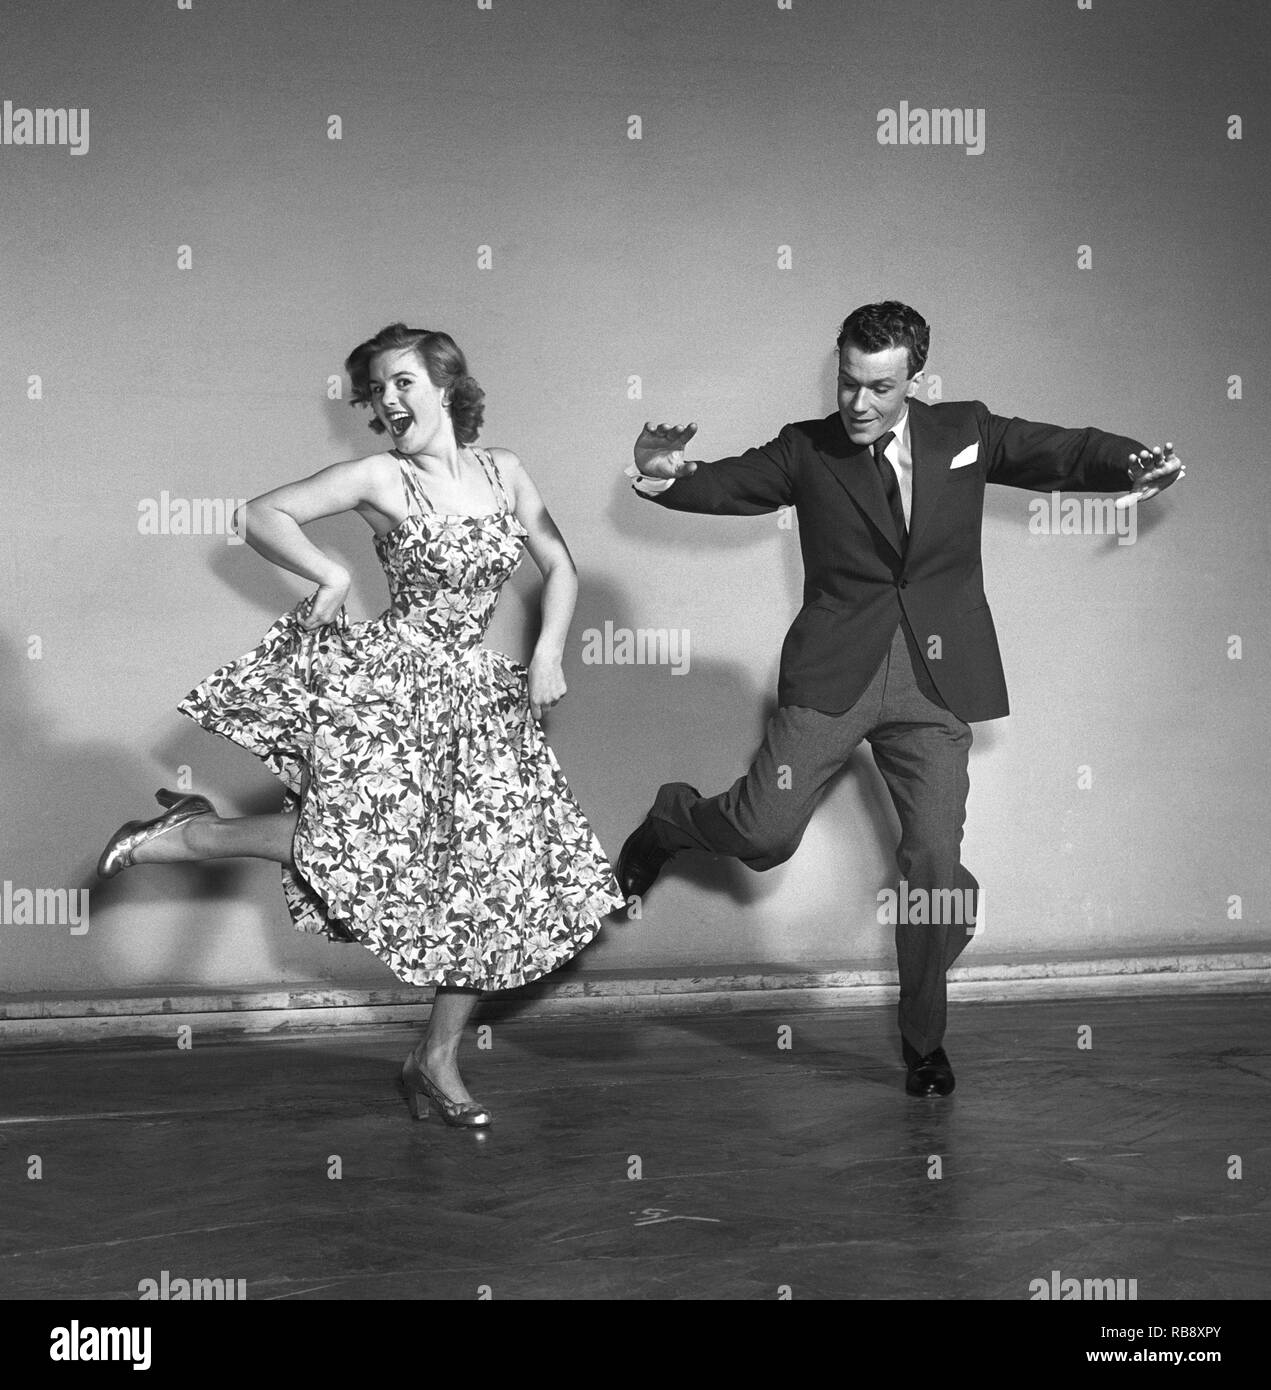 Charleston dance. A Dance named for the harbor city of Charleston, South Carolina and was popularized in the United States by a 1923 tune called The Charleston. The peak for the Charleston as a dance by the public was mid 1926 to 1927. Pictured Sonja Stjernquist and John Ivar Deckner dancing the Charleston 1950.  Photo Kristoffersson ref BA68-6 Stock Photo